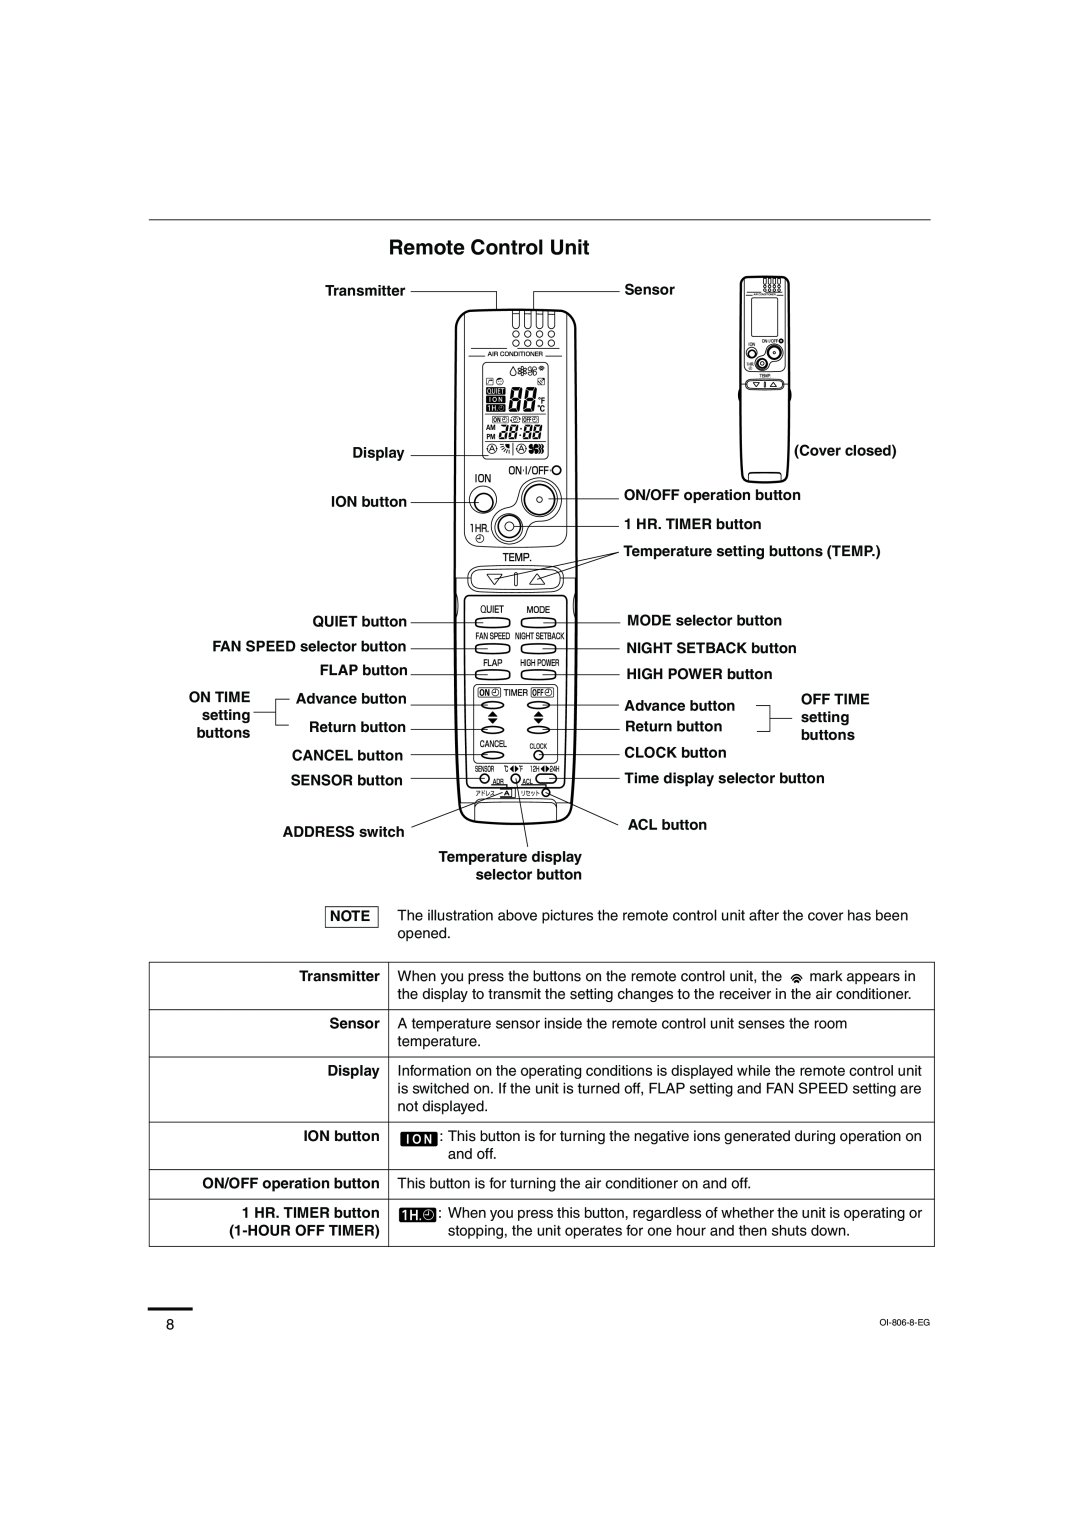 Sanyo KMS0972, KMS1272 instruction manual Remote Control Unit 